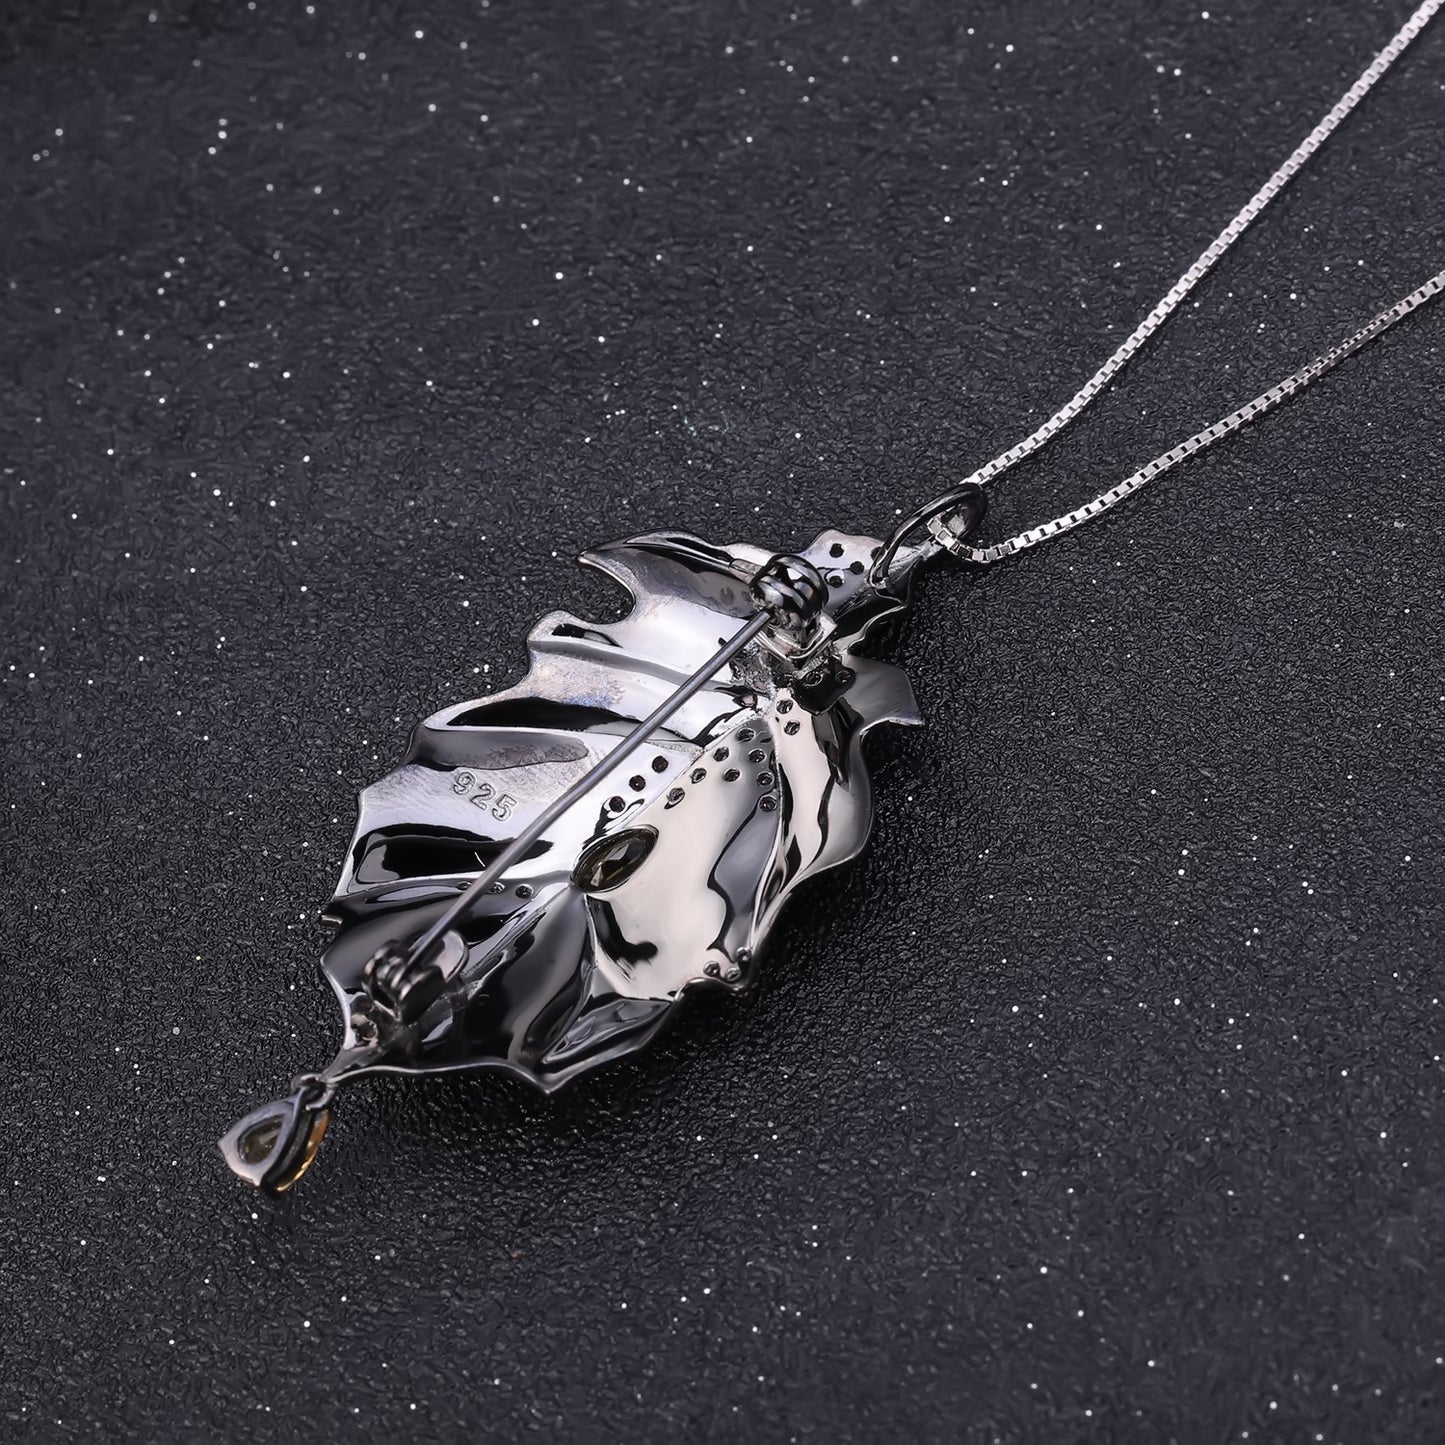 Italian Jewelry Design Brooch Pendant Dual-use Inlaid Natural Crystal Leaf Pendant Silver Necklace for Women